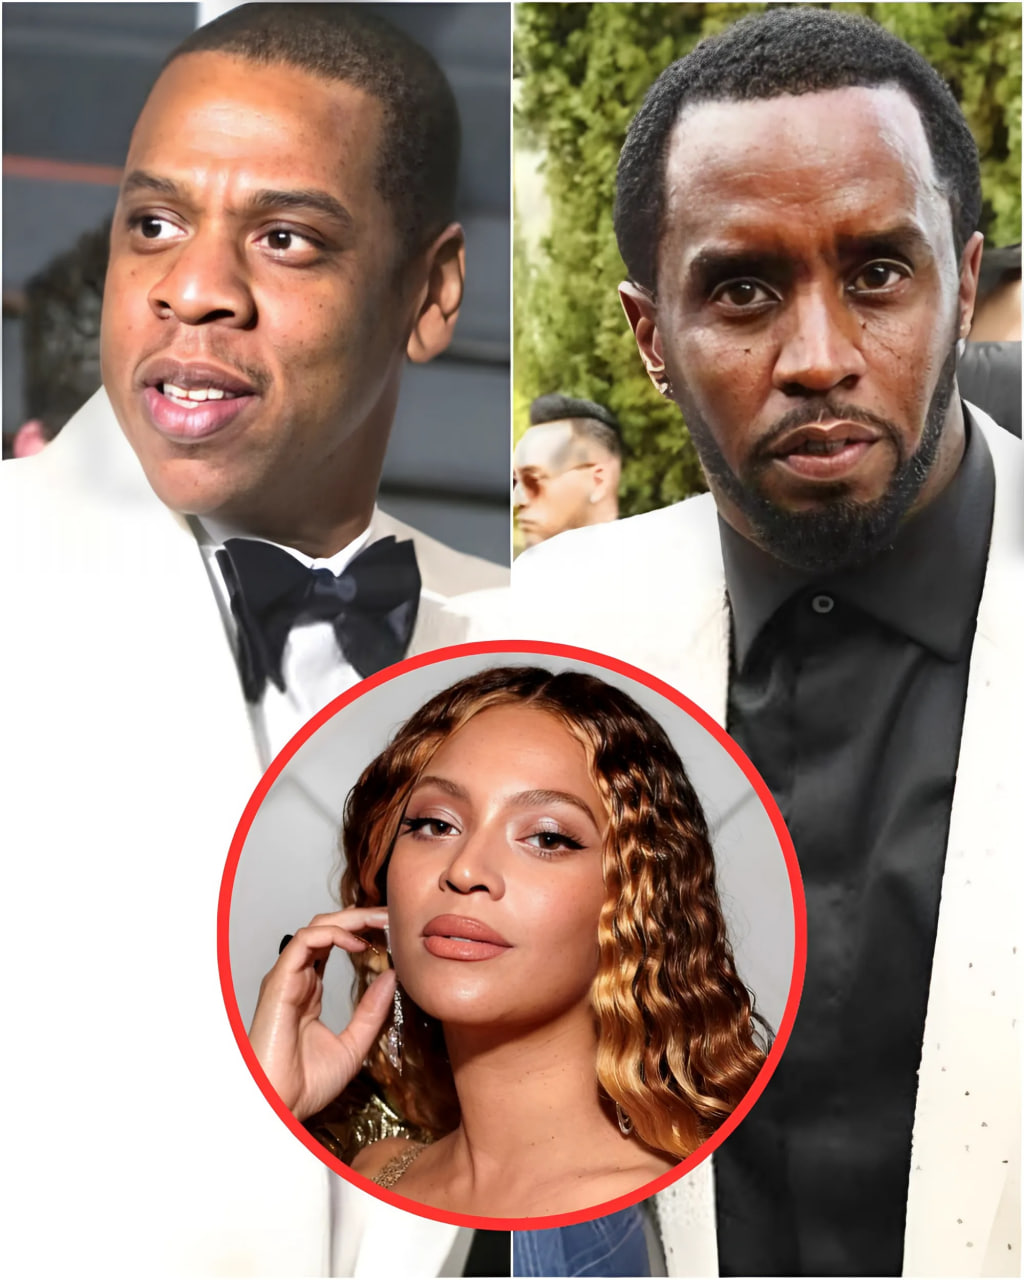 (VDIEO) ‘The gl@ss is breaking. Money reveals who you alre@dy are. House of cards is falling’: Diddy EXPOSES Jay Z’s Dark Secret (BEYONCE DID IT)